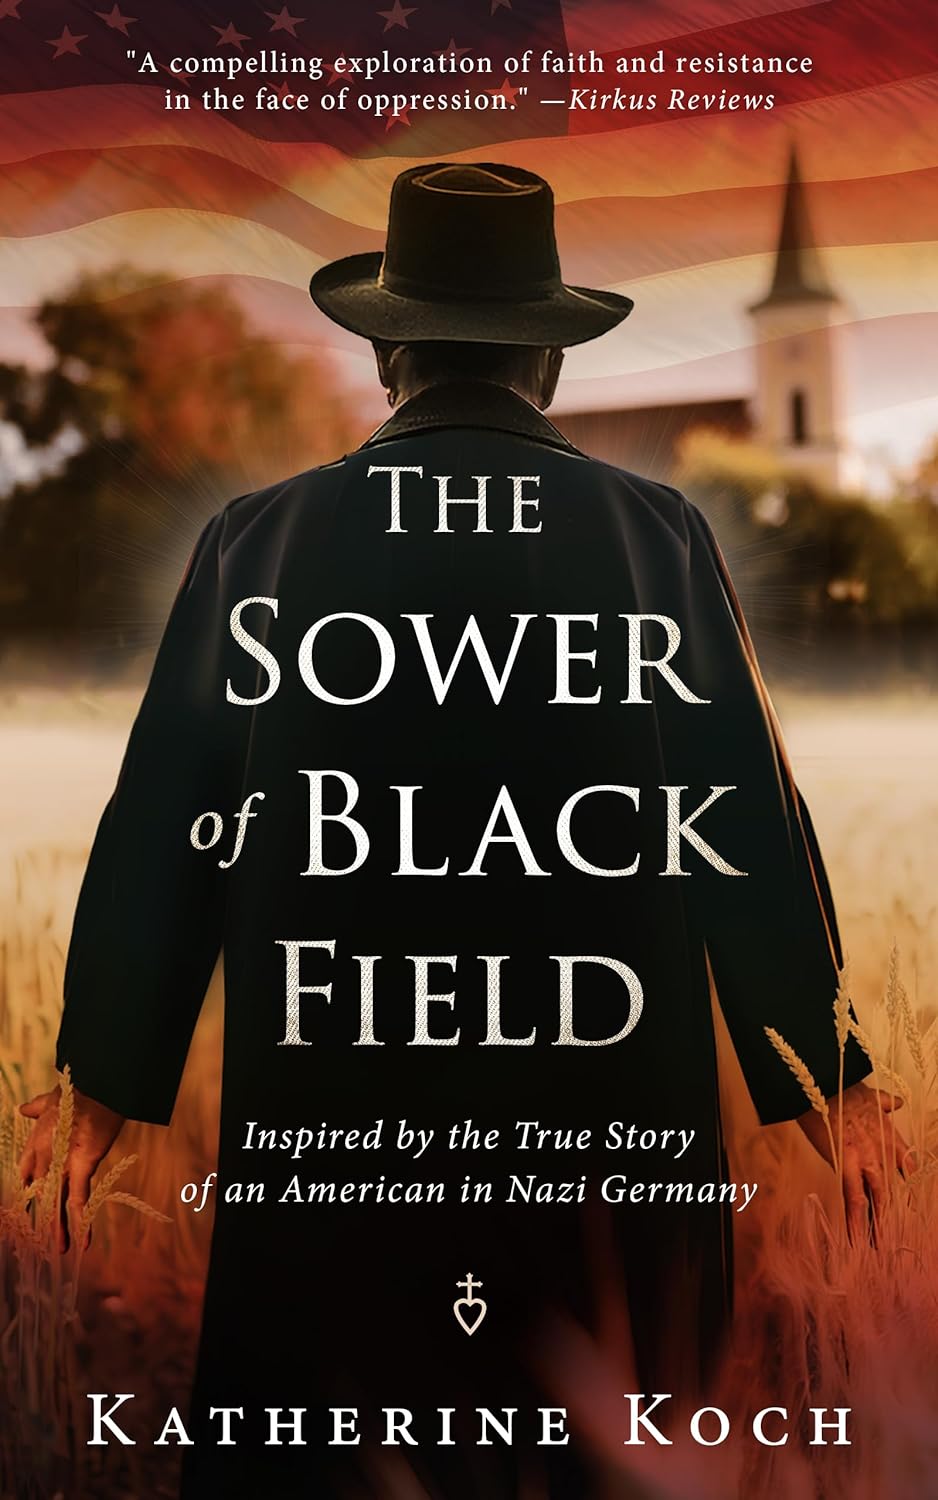 New novel "The Sower of Black Field" by Katherine Koch is released, a work of historical fiction based on the true story of an American missionary’s harrowing experience in Nazi Germany